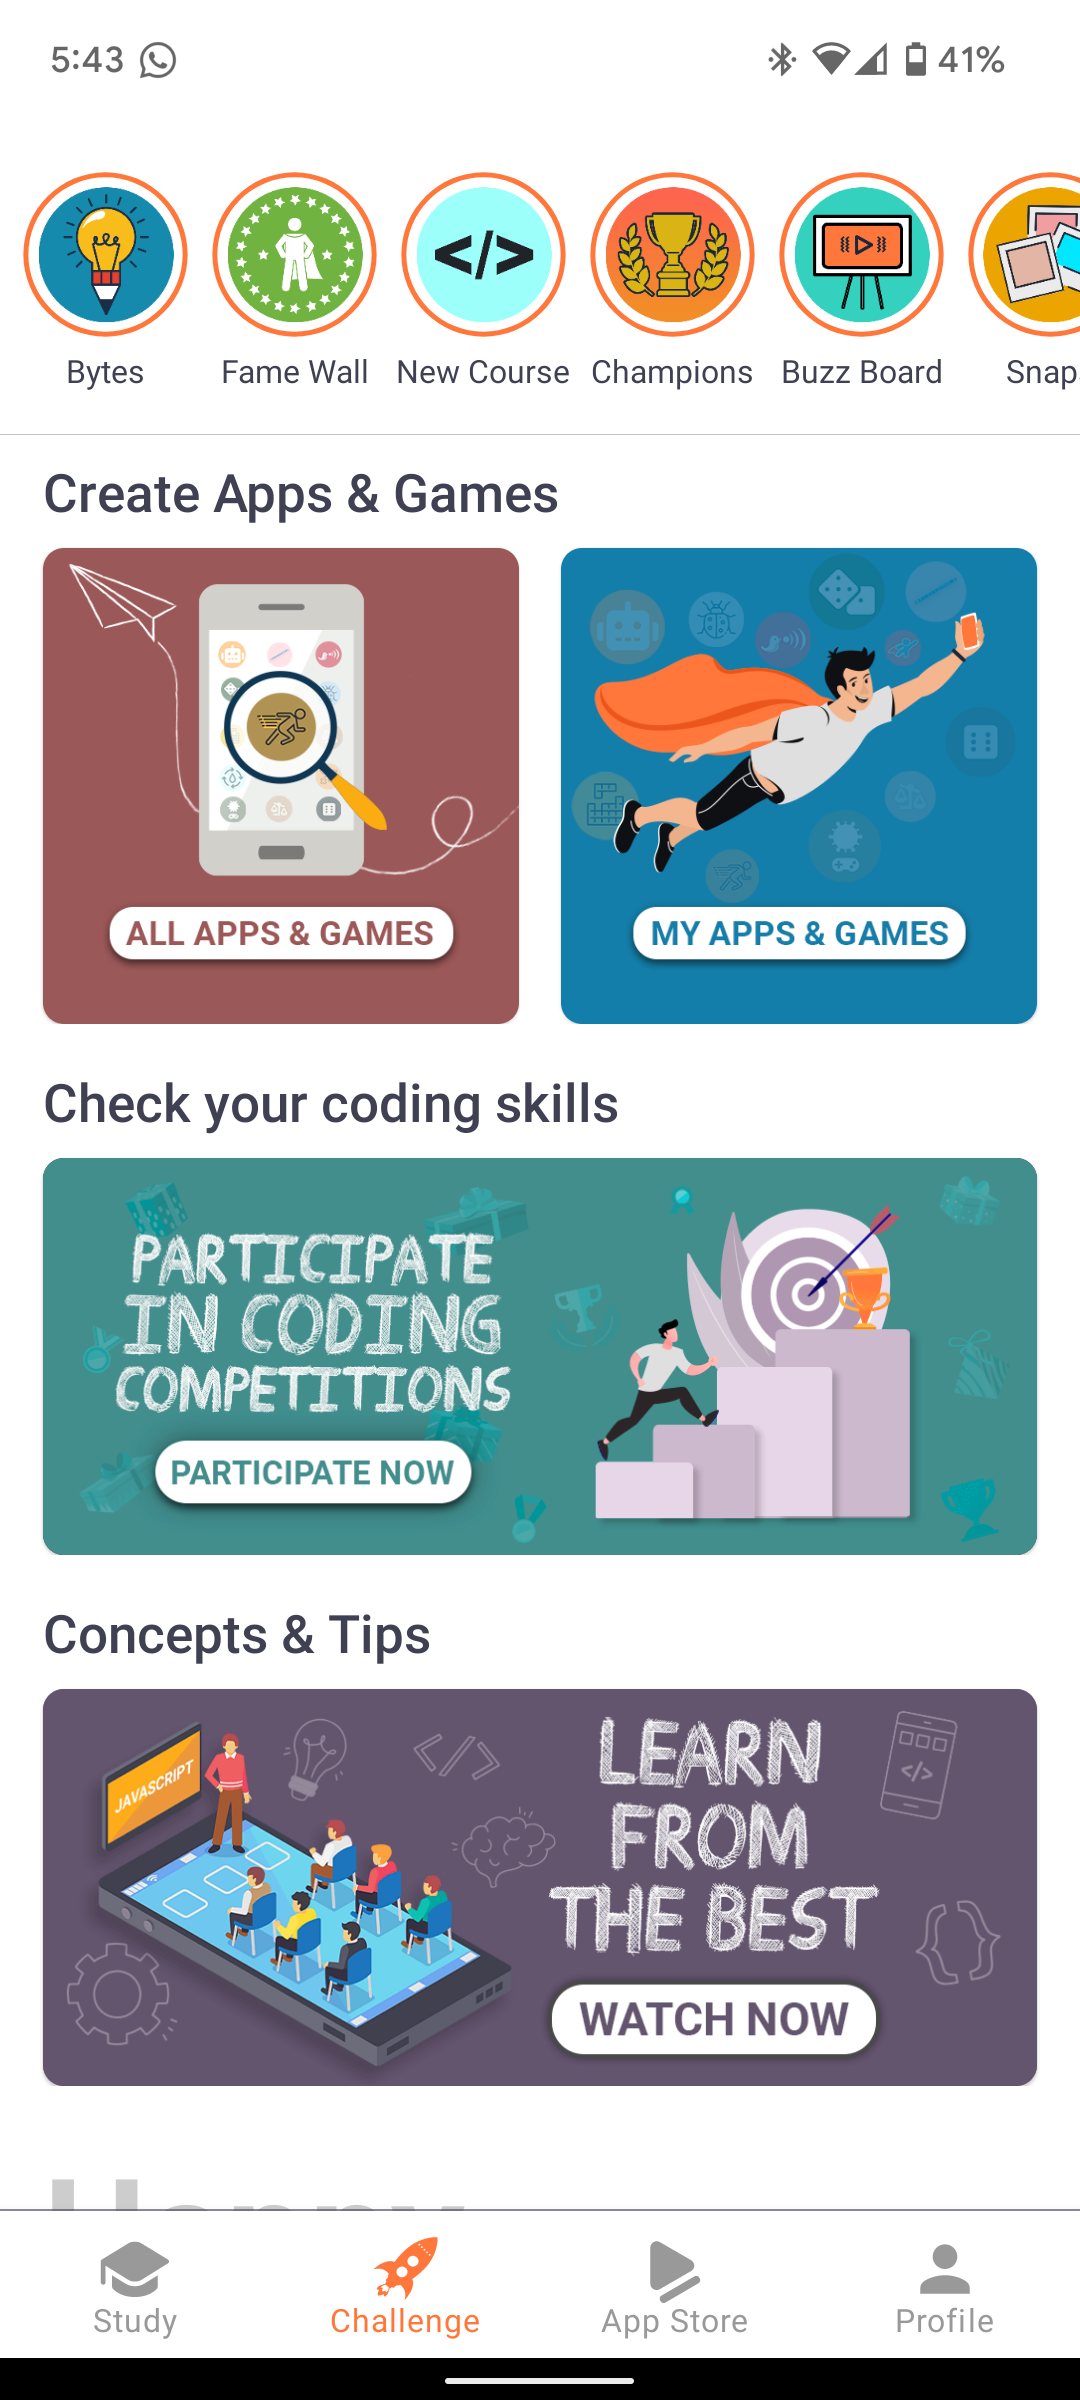 The Top 10 Best Coding Apps To Learn Sql Python And More On The Go